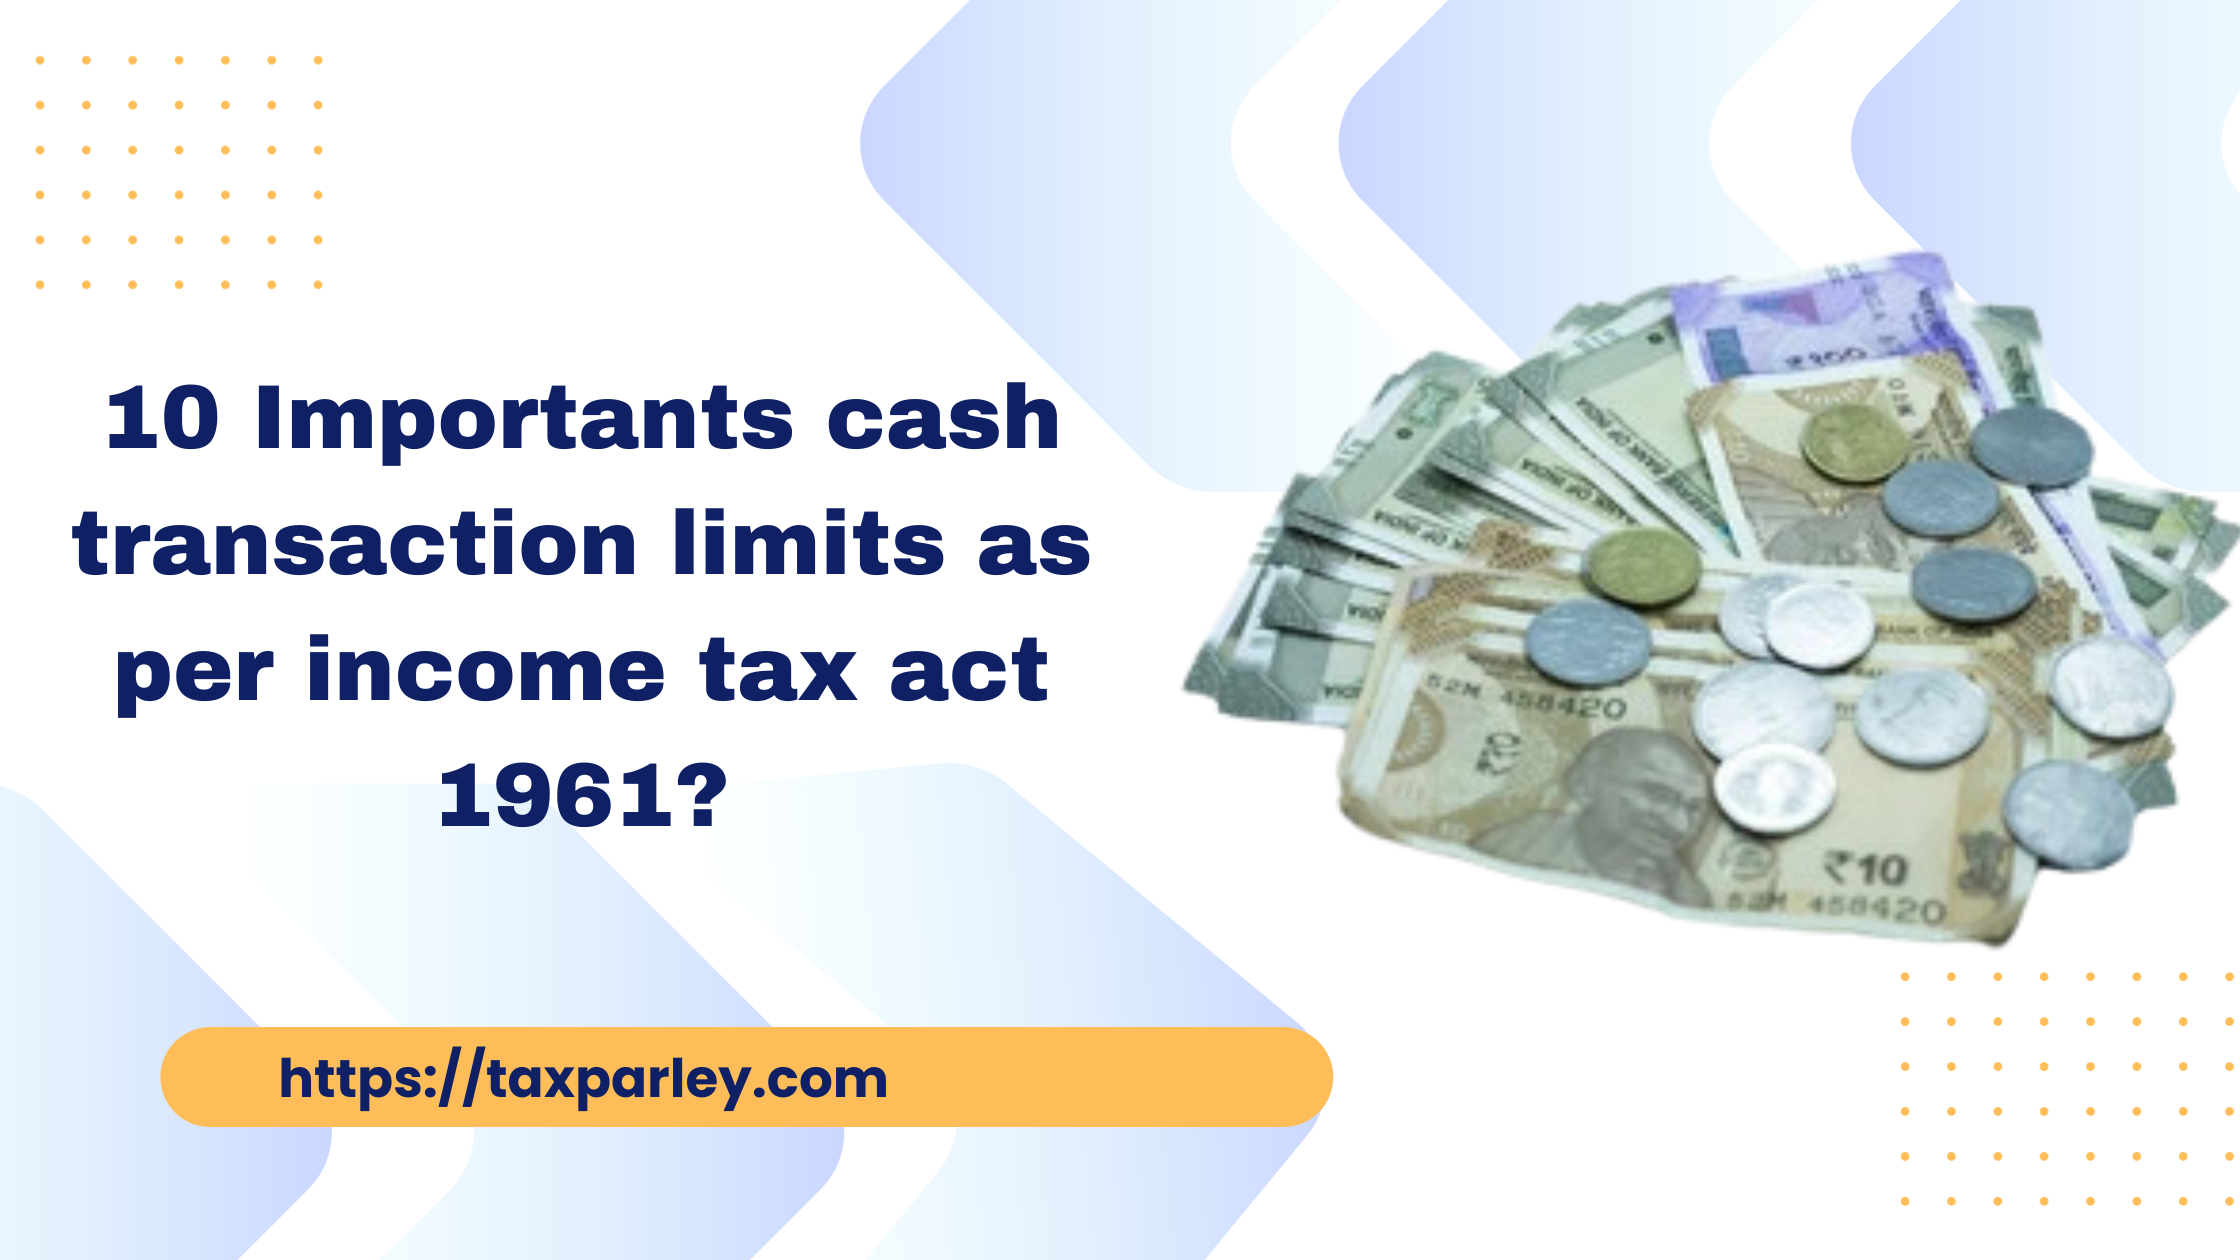 10 Importants cash transaction limits as per income tax act 1961?